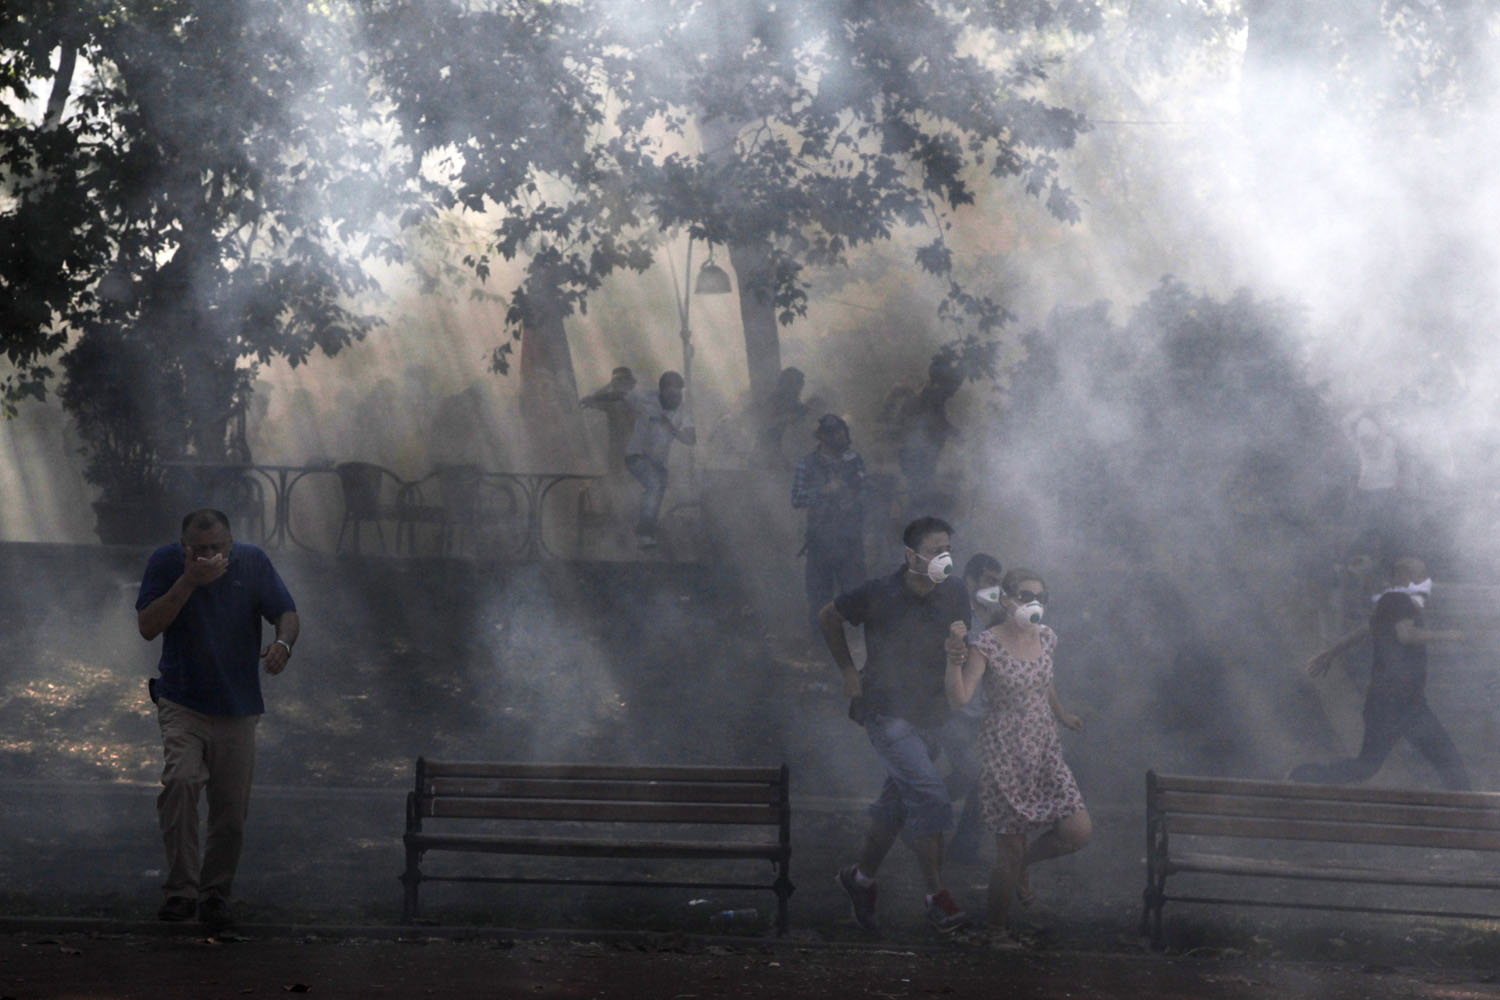 June 1, 2013. Protestors run away from tear gas at Gezi Park in Istanbul after clashes with riot police during a demonstration against the demolition of the park.